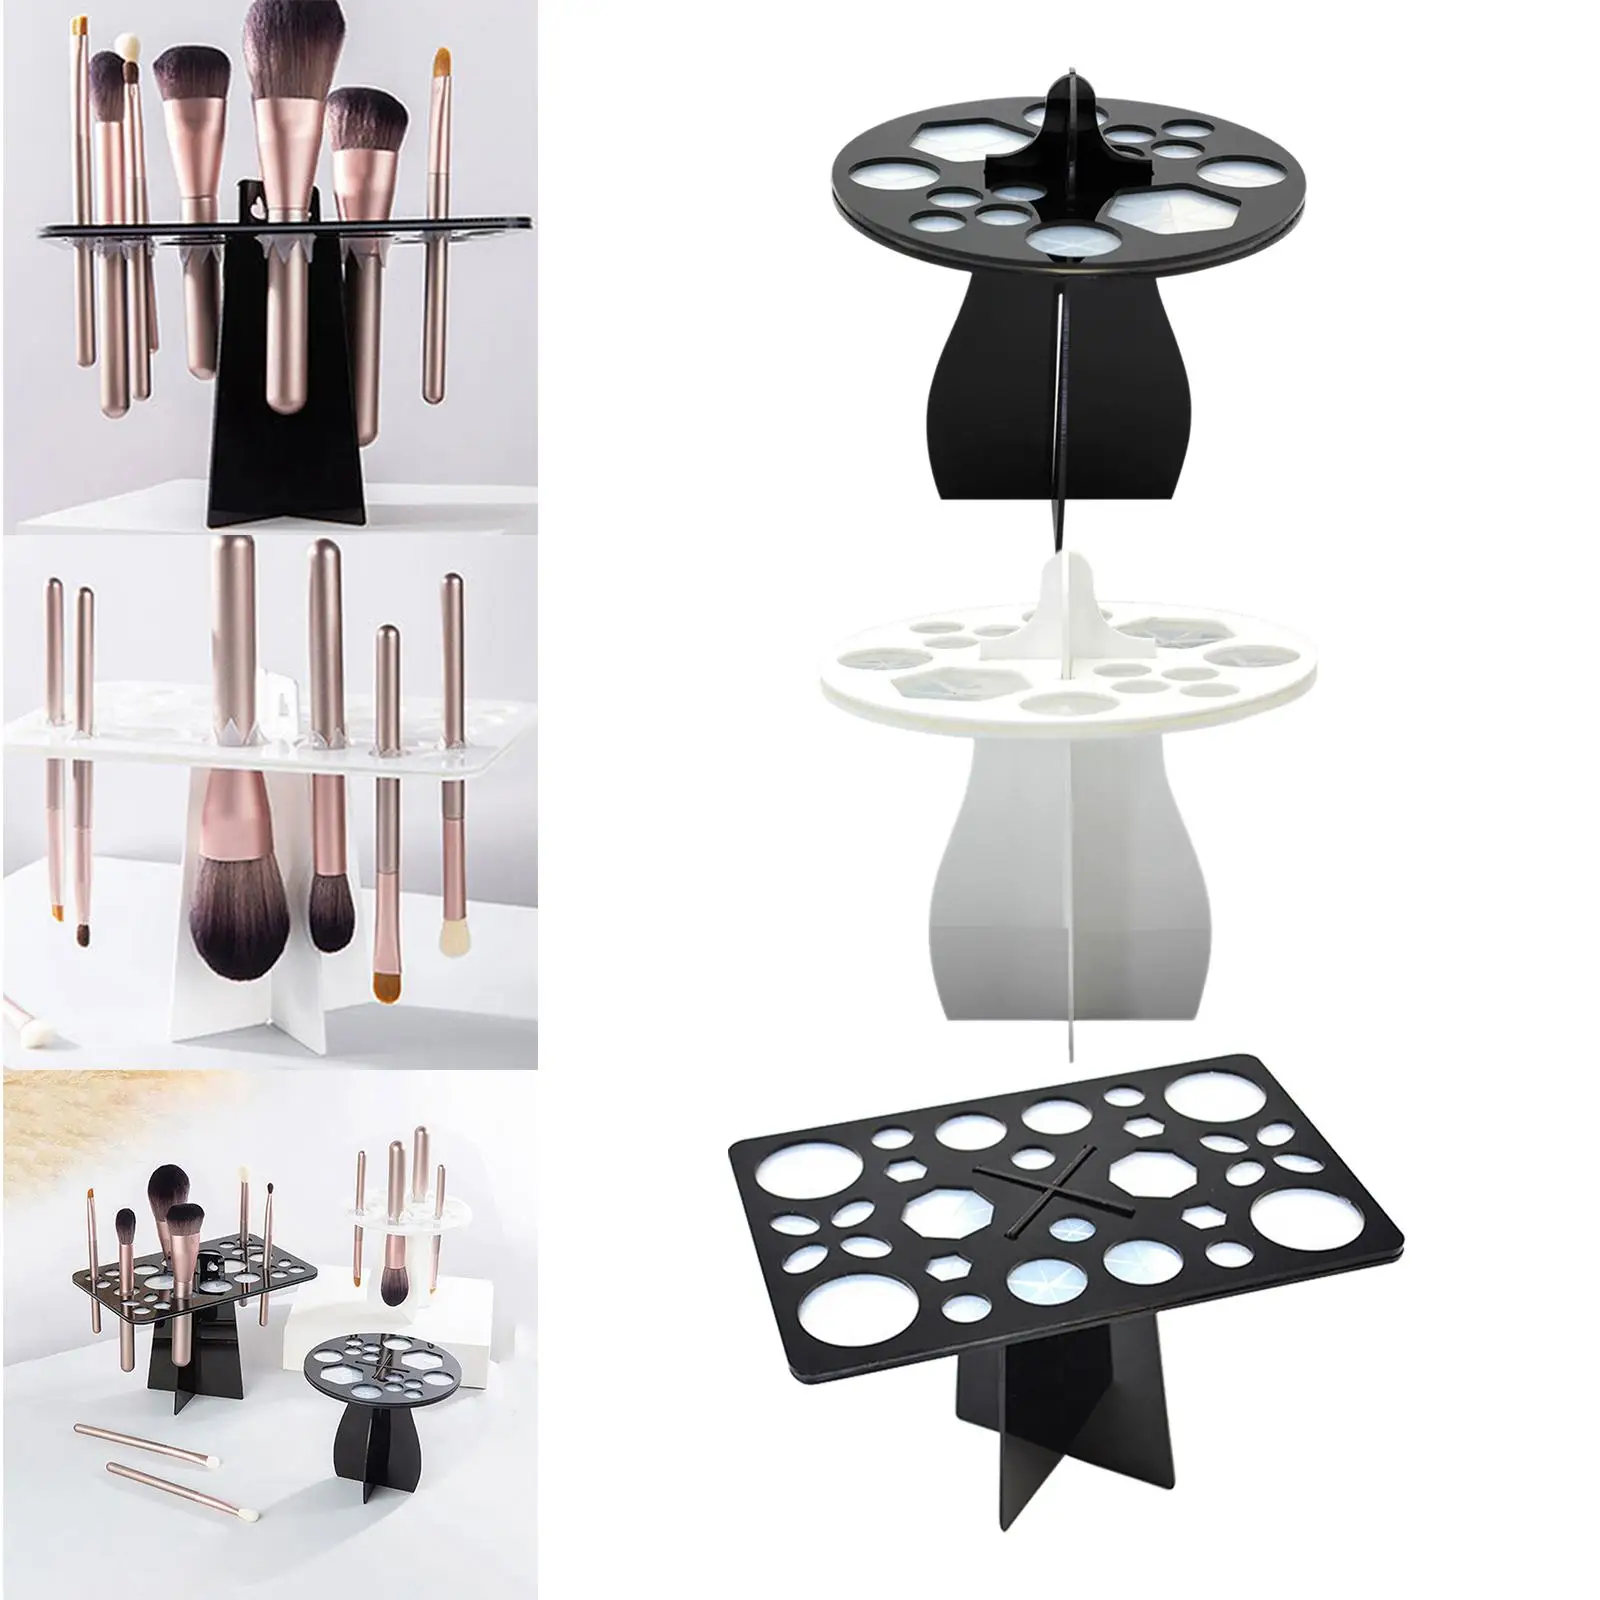 Acrylic Makeup Brushes Drying Rack, Removable Tree Tray Wear Resistant Accessories